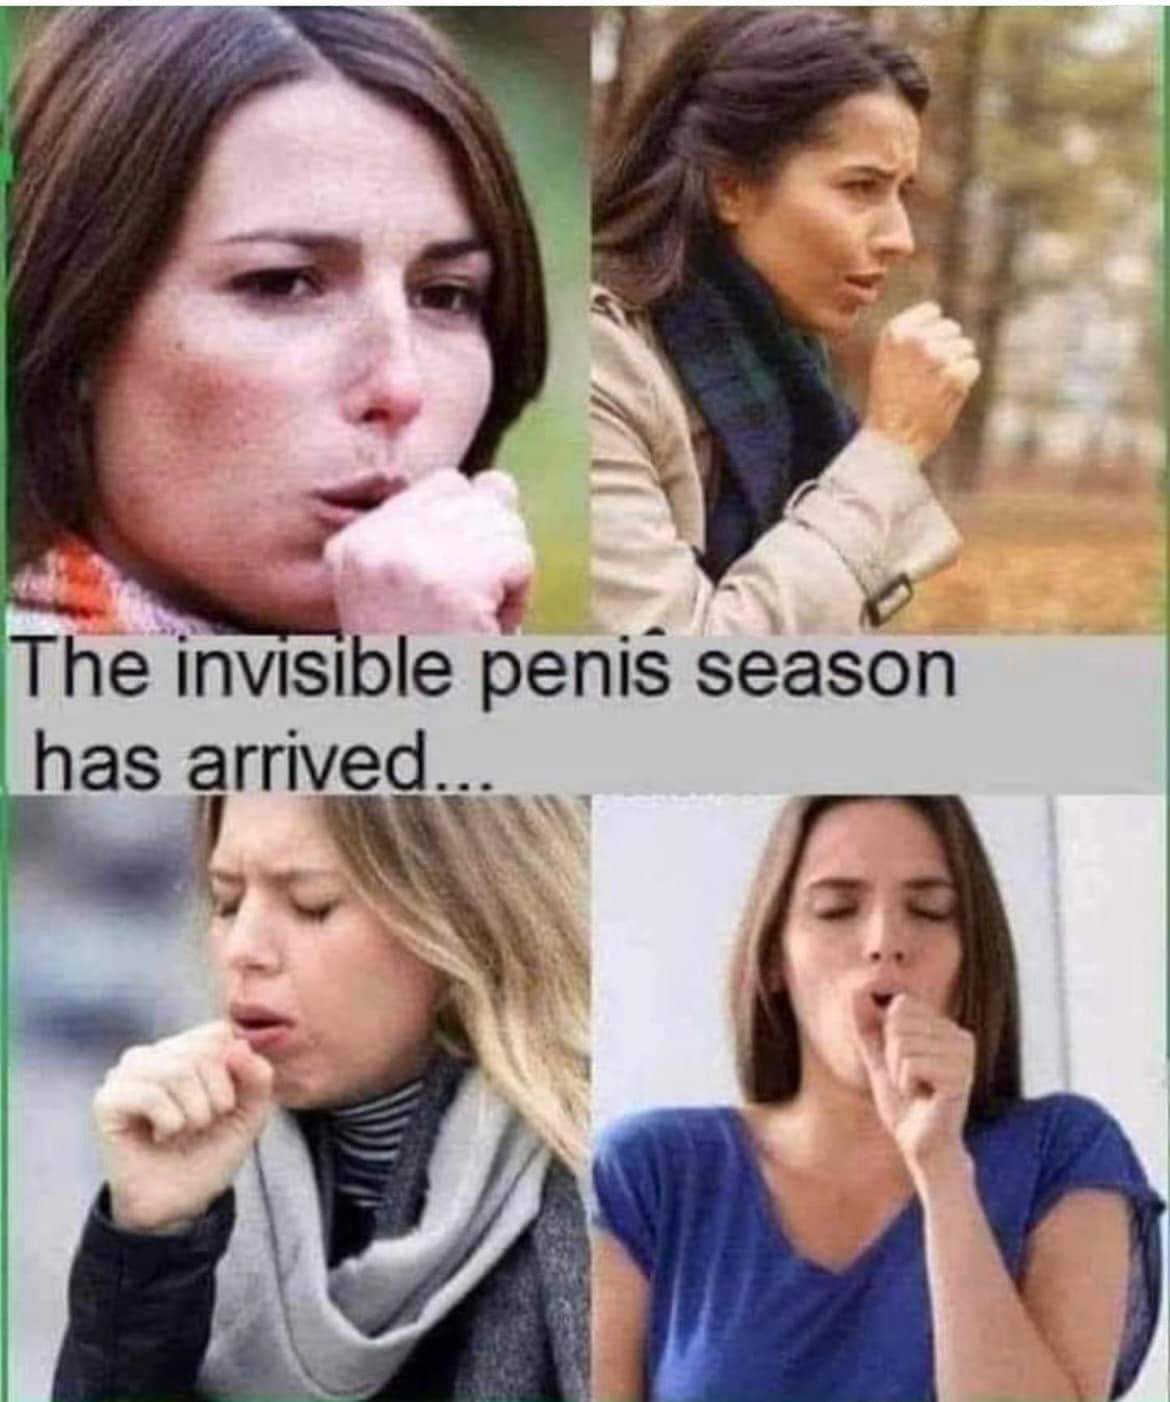 the_invisible_penis_season_has_arrived.jpg